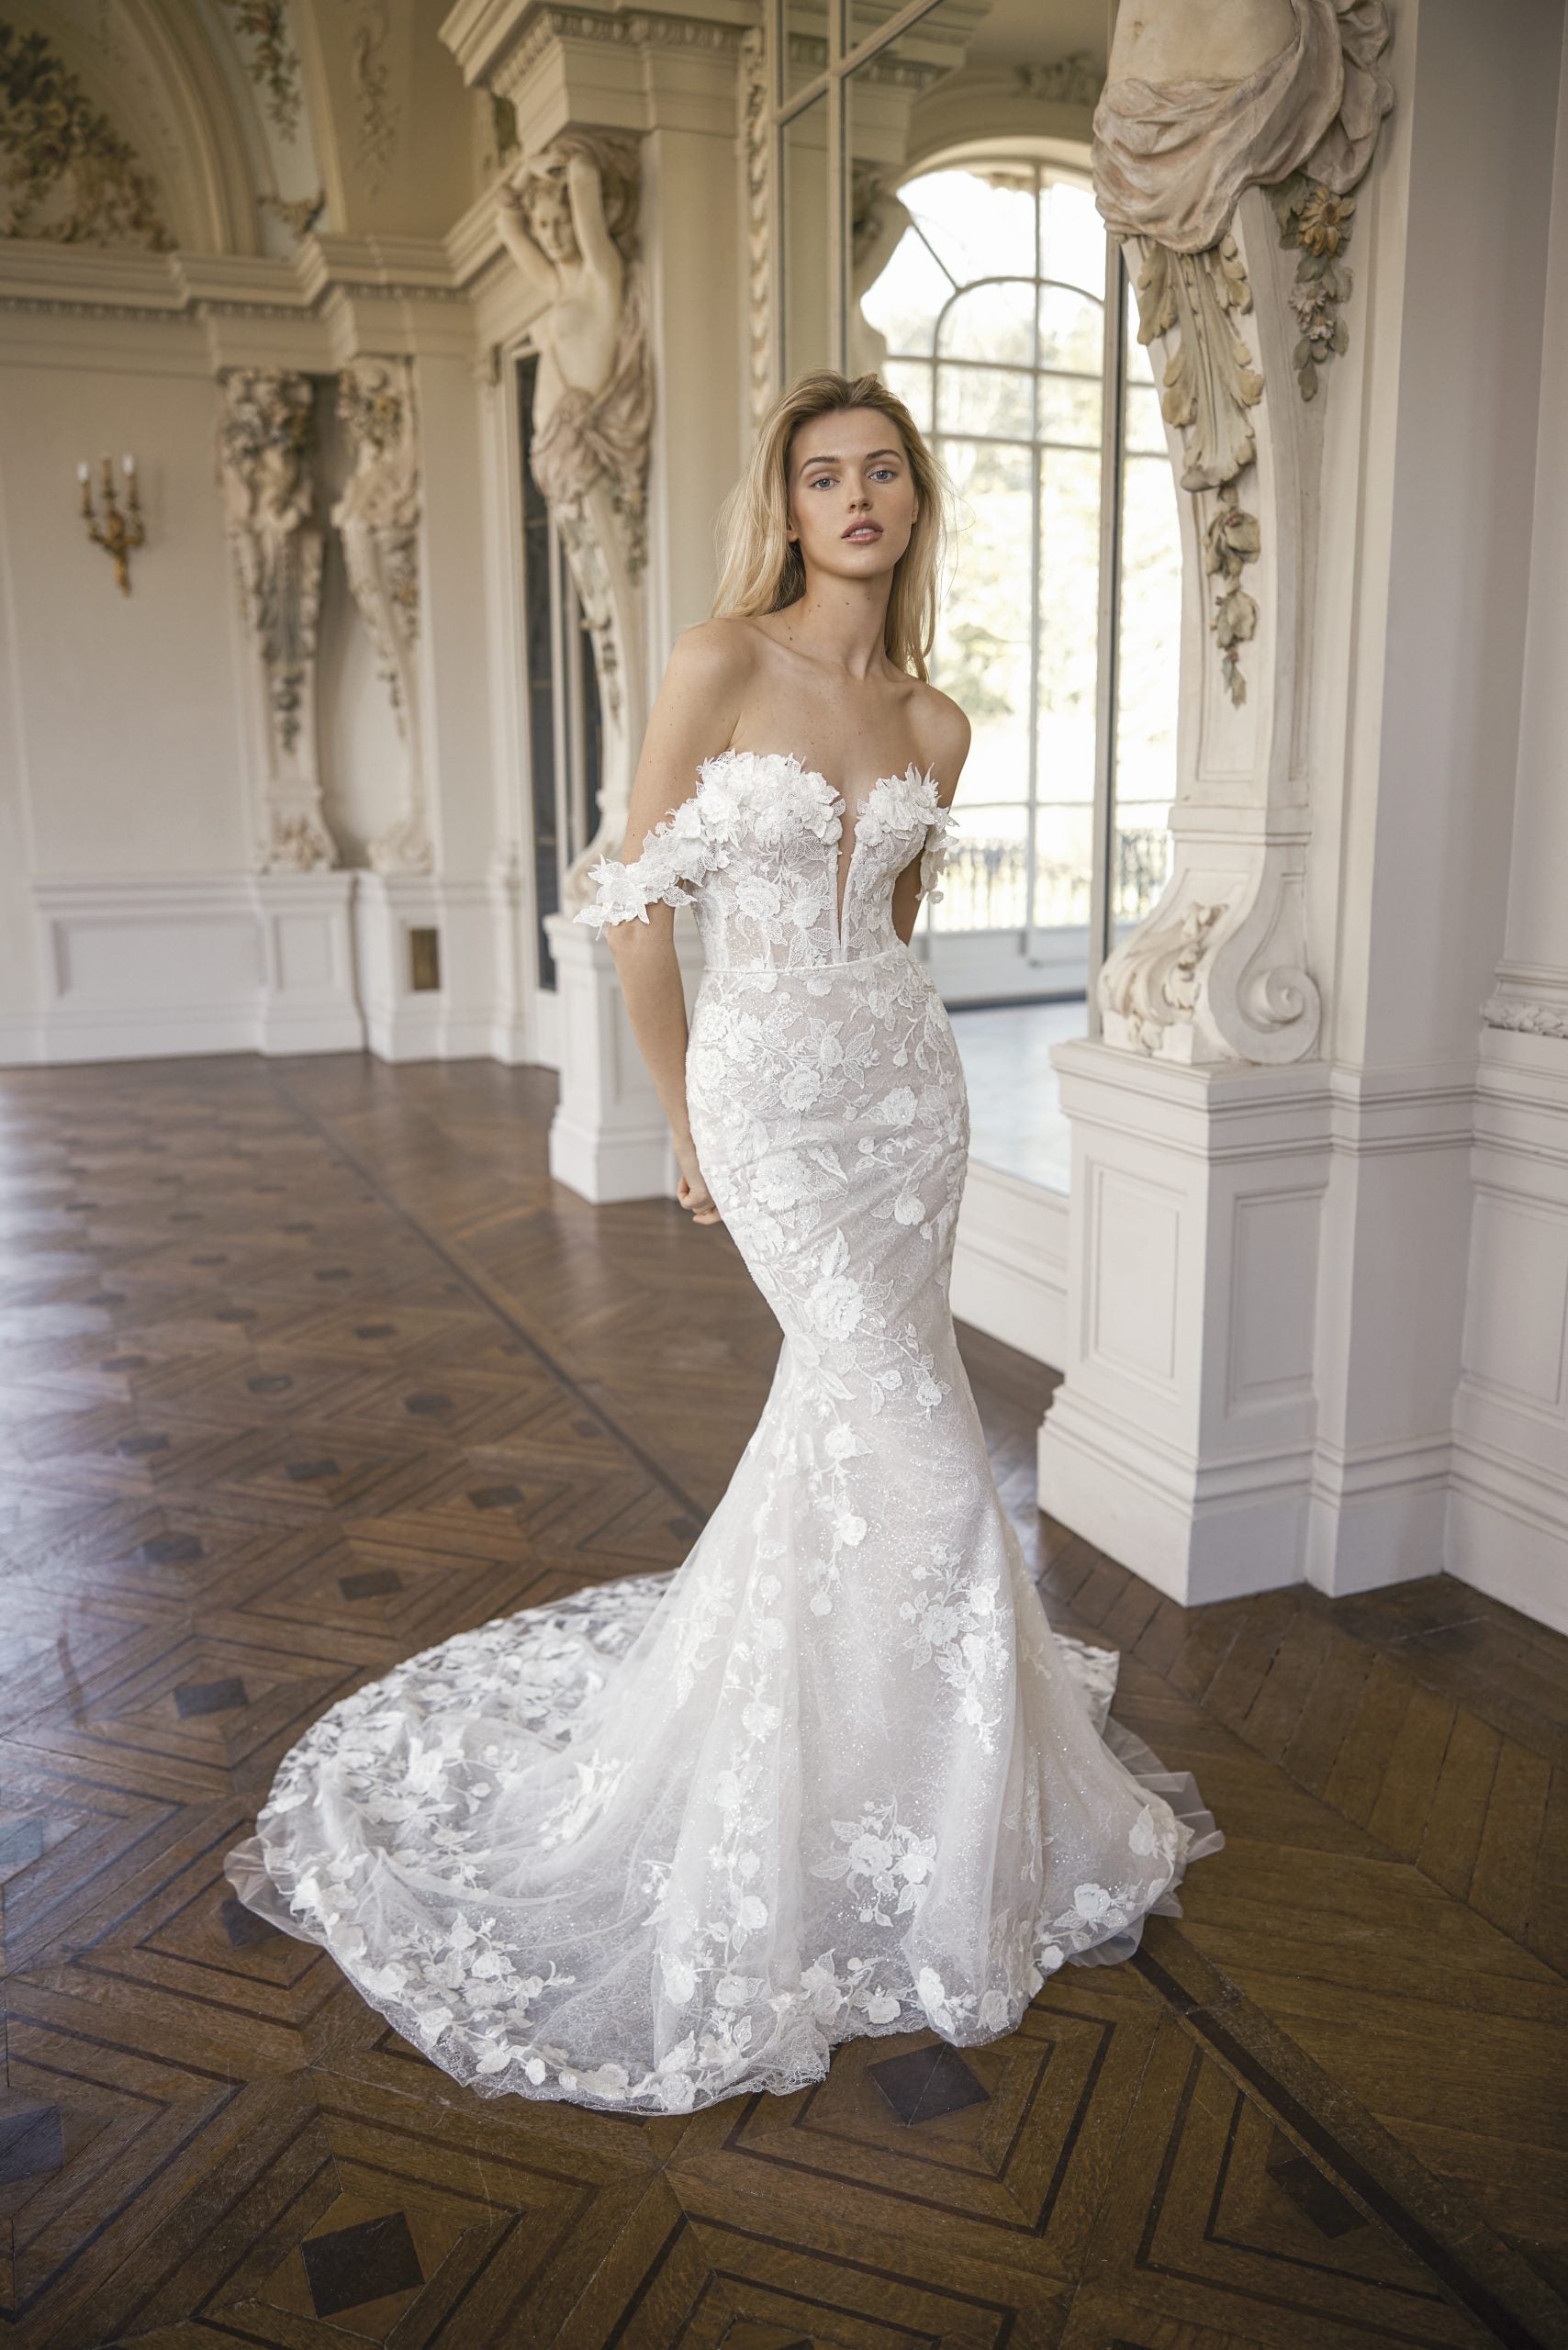 Romantic Floral Off-the-Shoulder Fit-and-Flare Gown by Netta BenShabu Elite Couture - Image 1